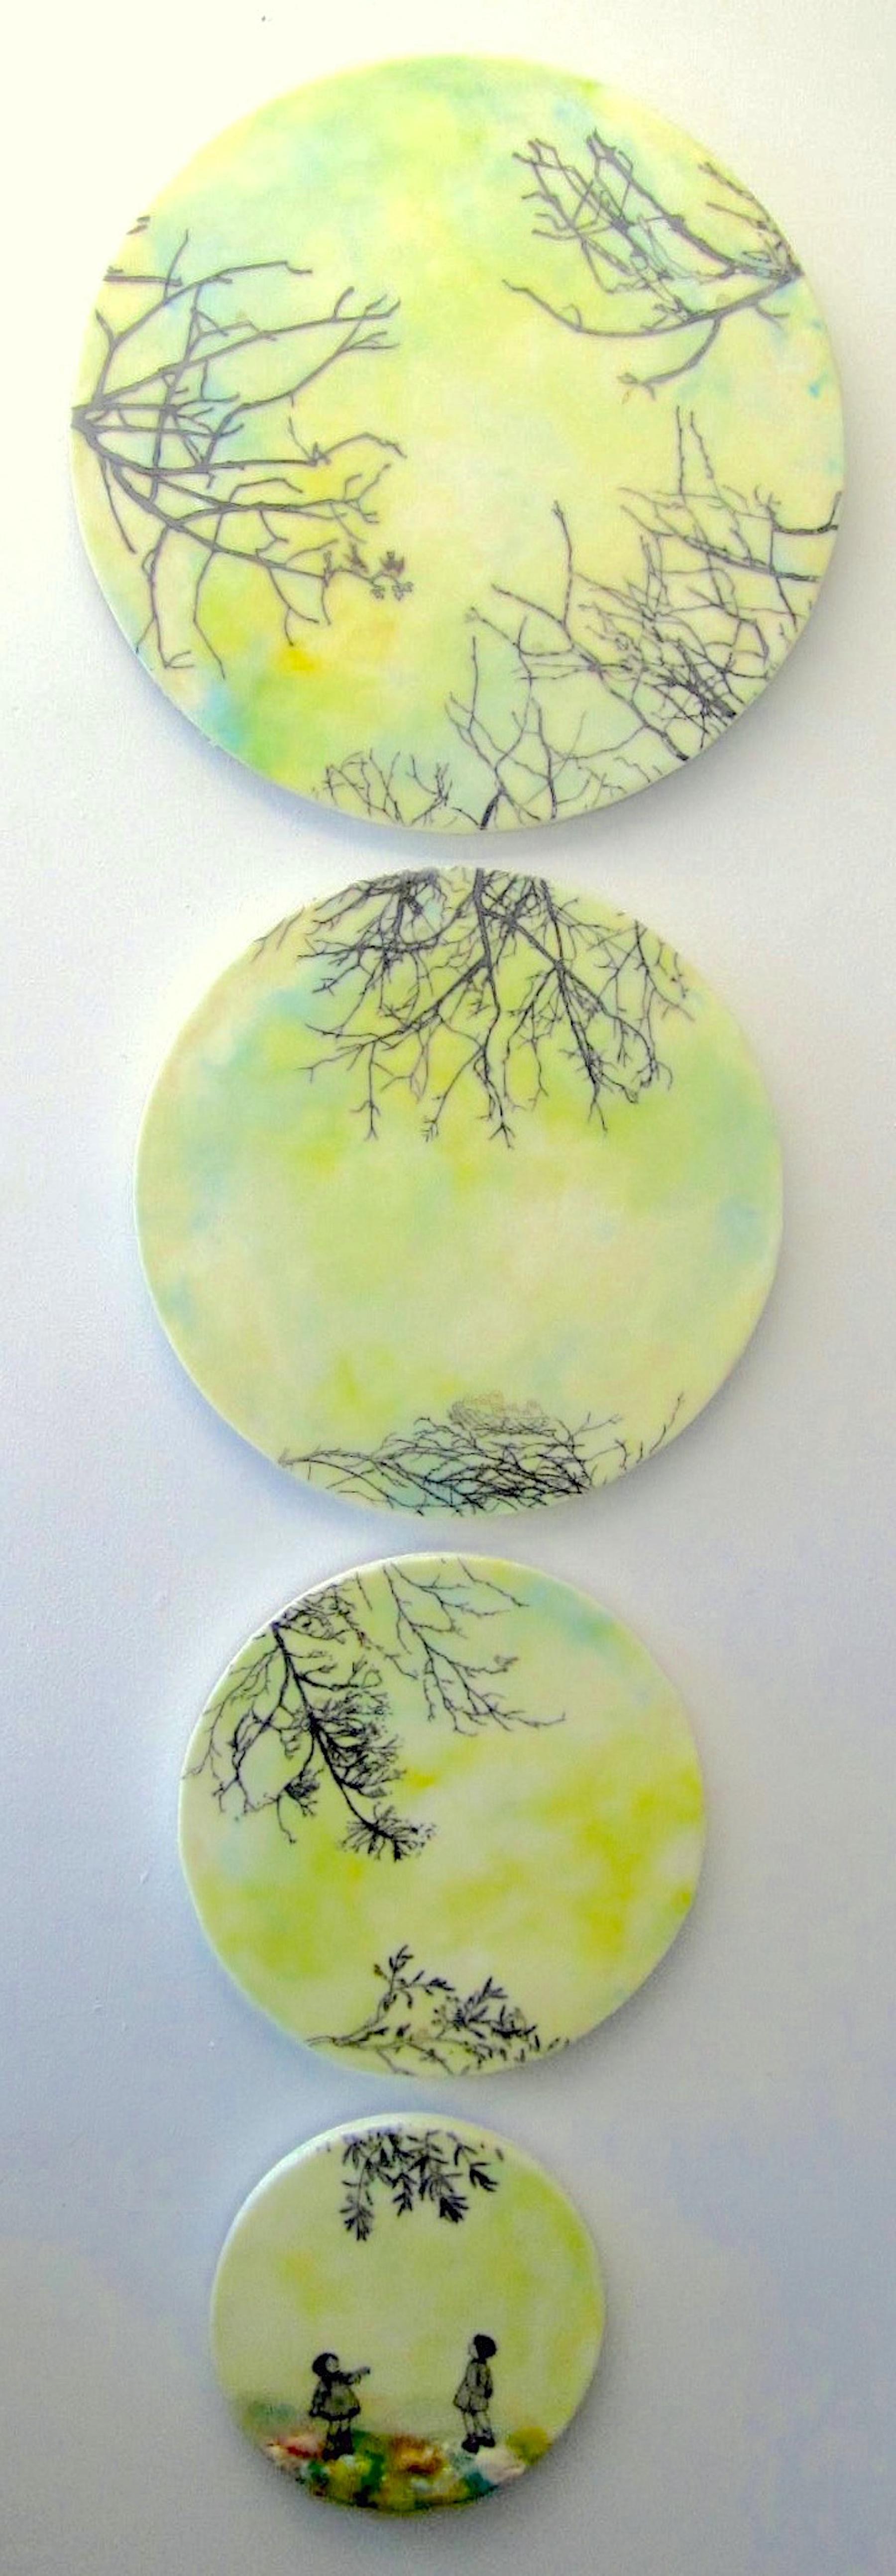 Branches Everywhere, Blue, Ivory, Yellow Children, Trees, Circular Encaustic